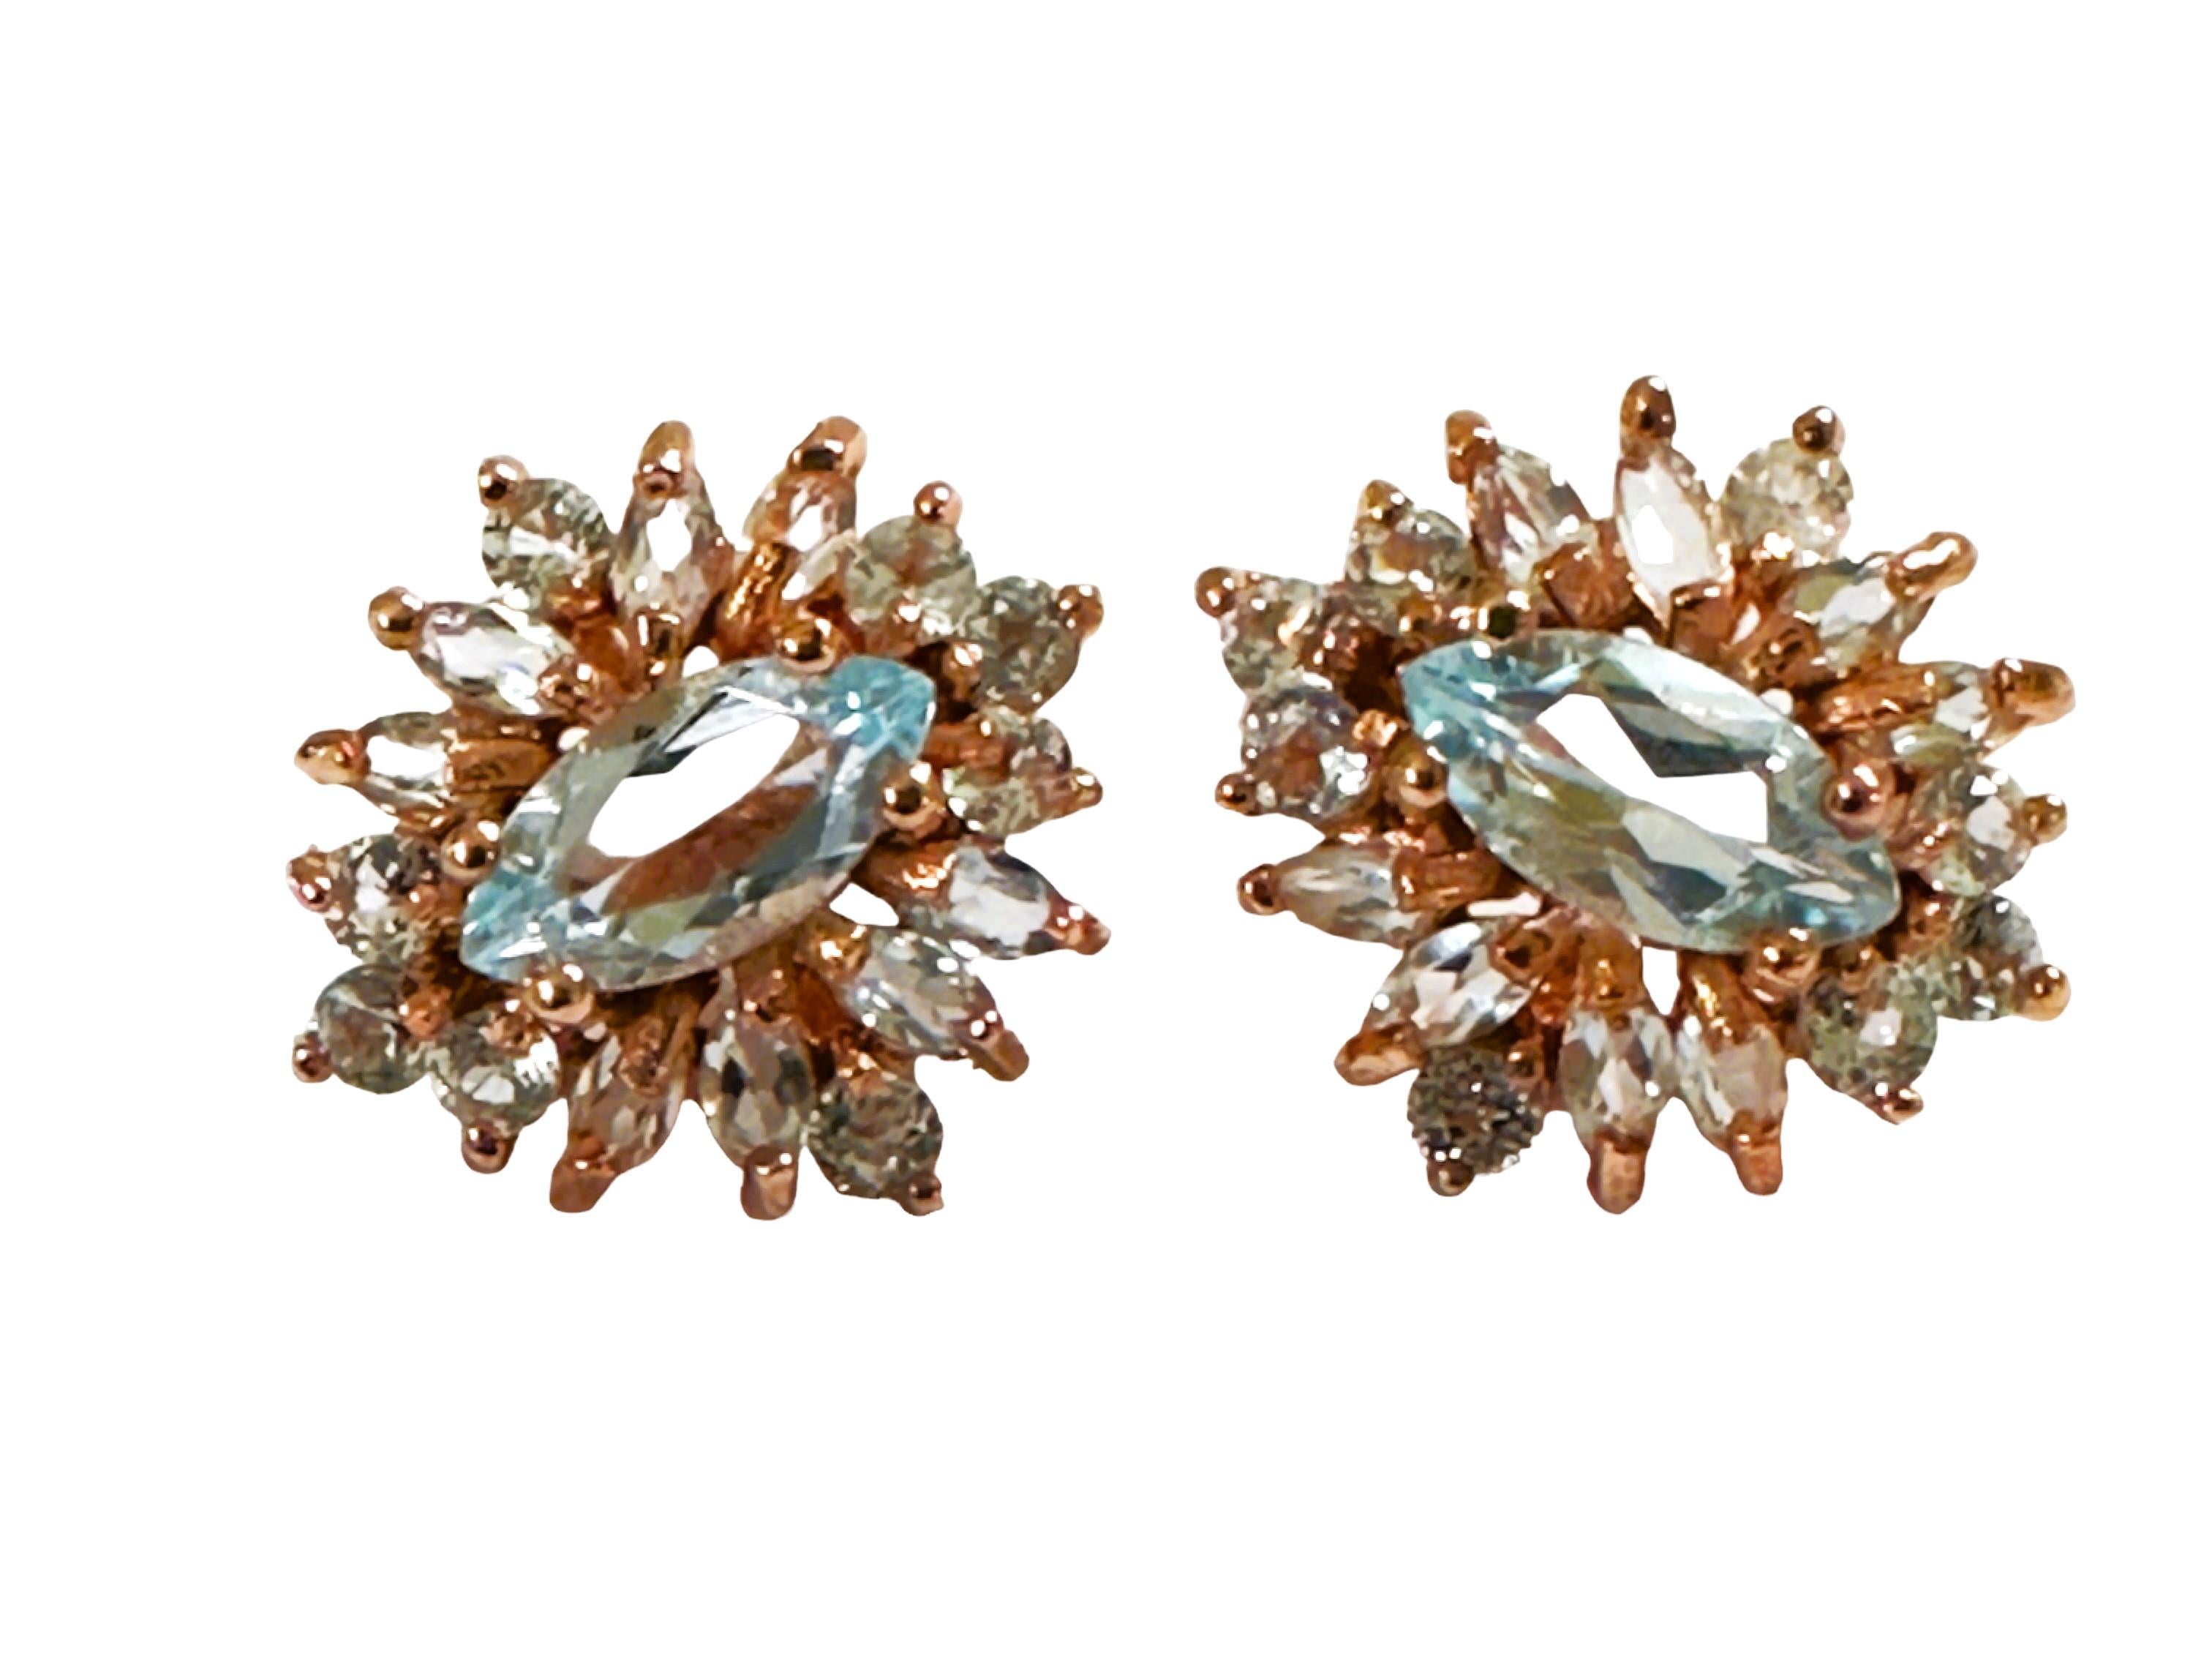 What beautiful colors in these earrings!  They are just dazzling. They are marquise and round cut stones.  The center stones measure 10 x 5 mm I would say each earring is approximately 2 carats. The earrings themselves are 18 mm long and 16 mm wide.